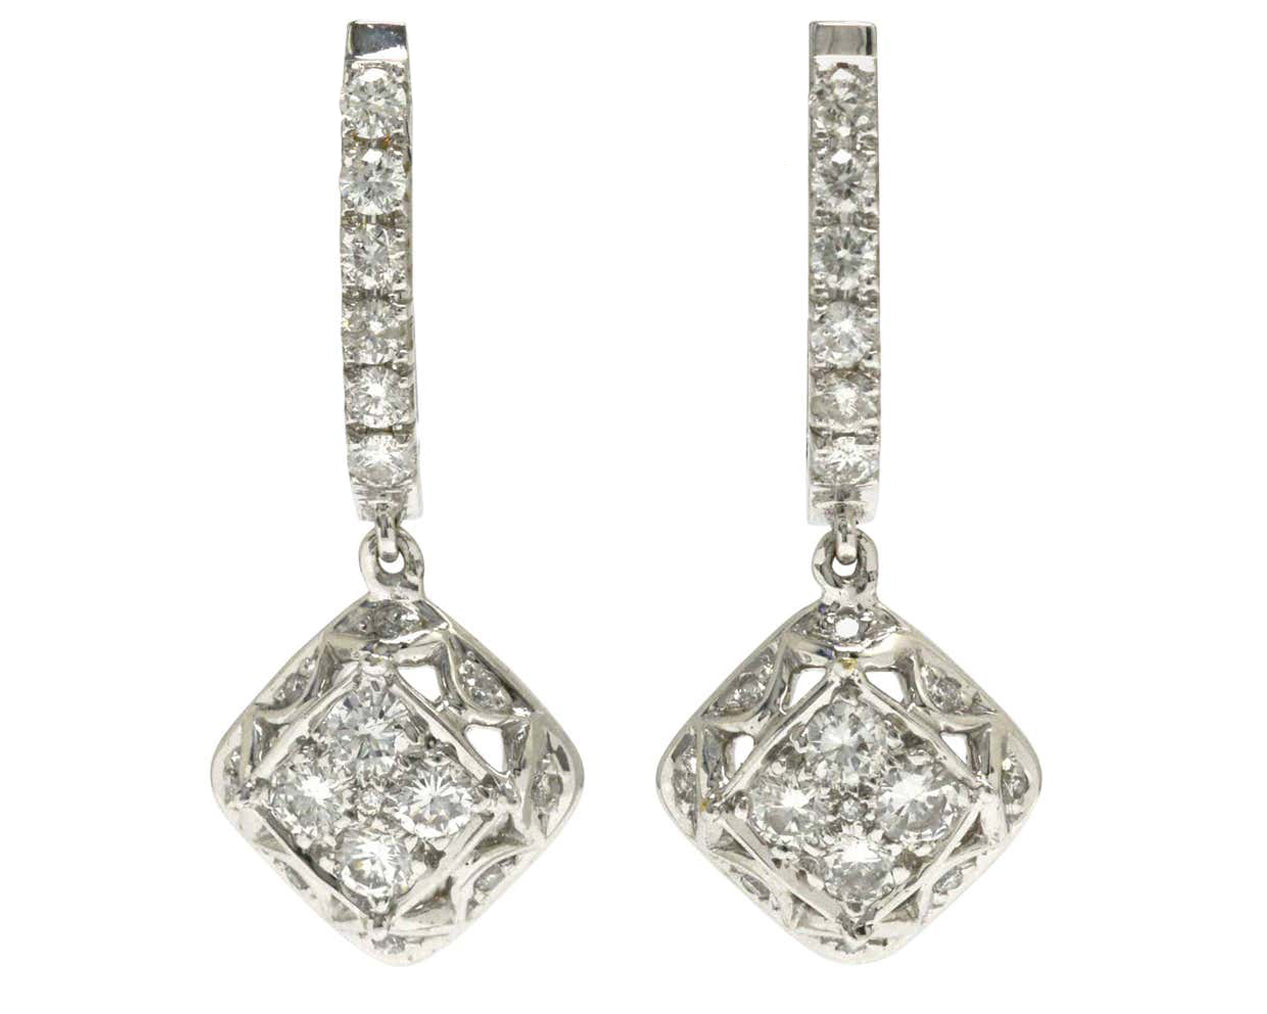 At over 1 carat, these diamond shaped dangle earrings are unique.